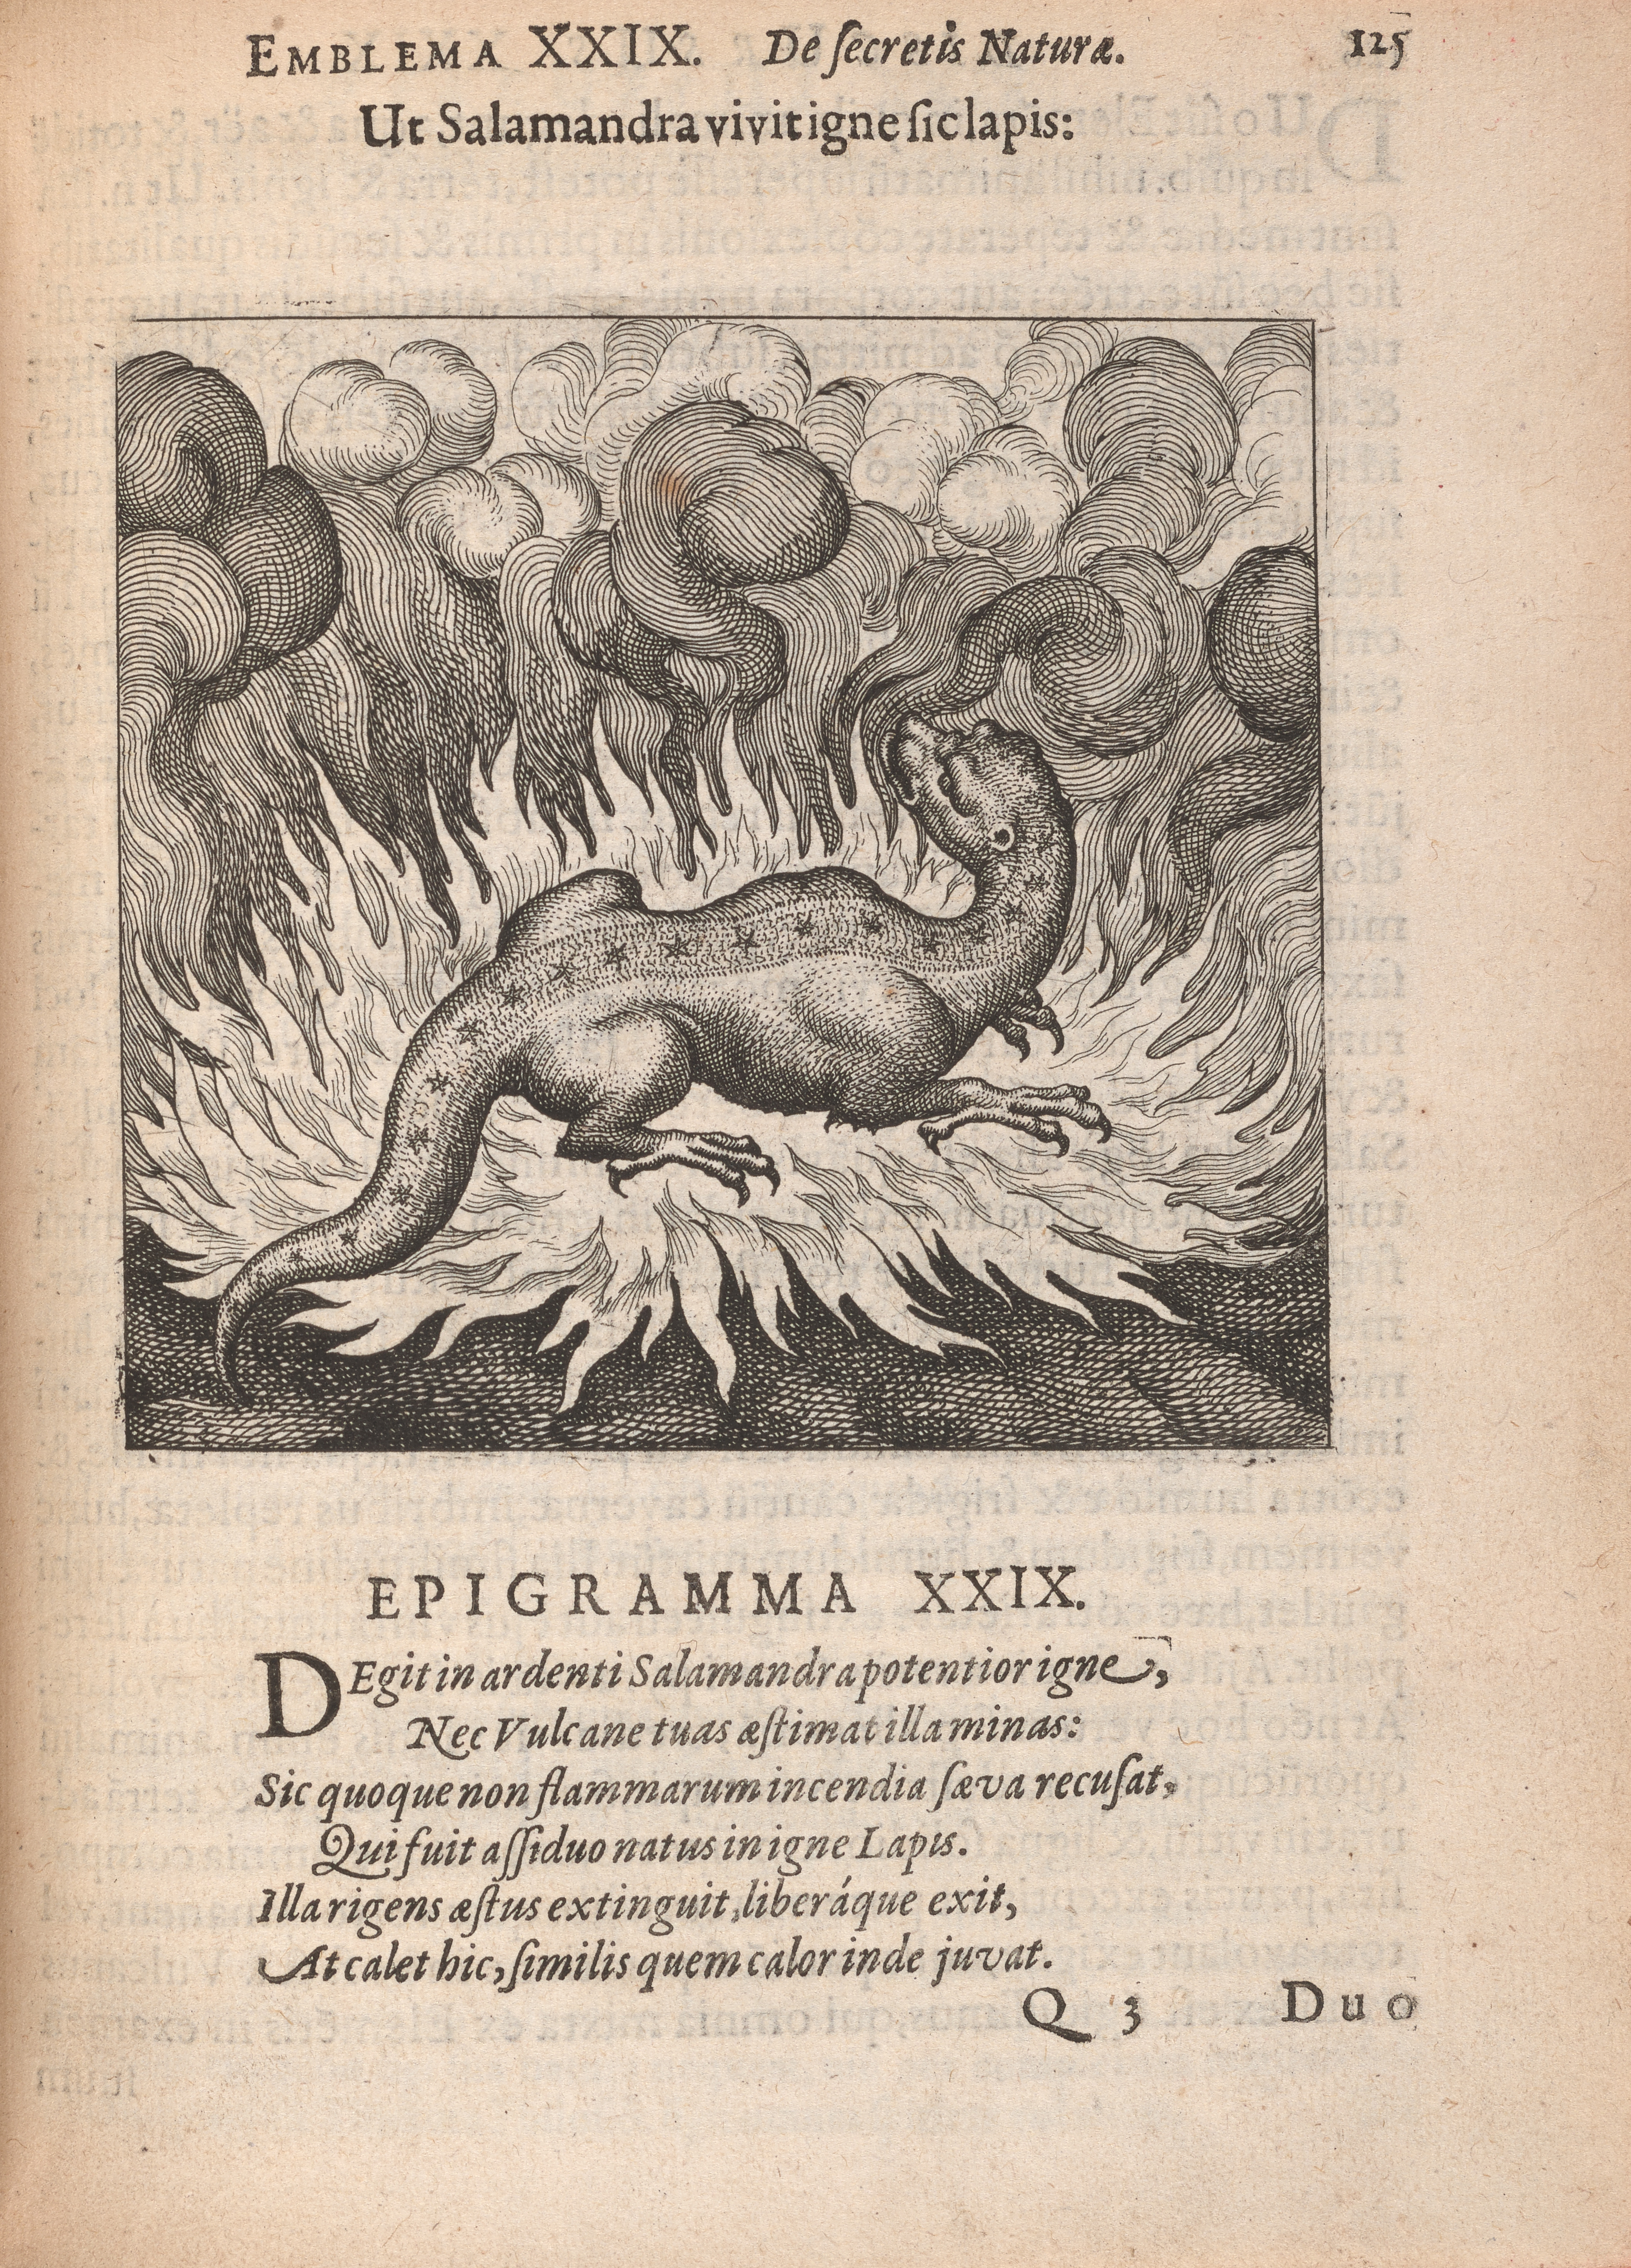 The second page of emblem 29 of Atalanta fugiens, which shows a motto and epigram in Latin, and an image of a salamander with stars in a line down his back and large claws is engulfed in fire and smoke.